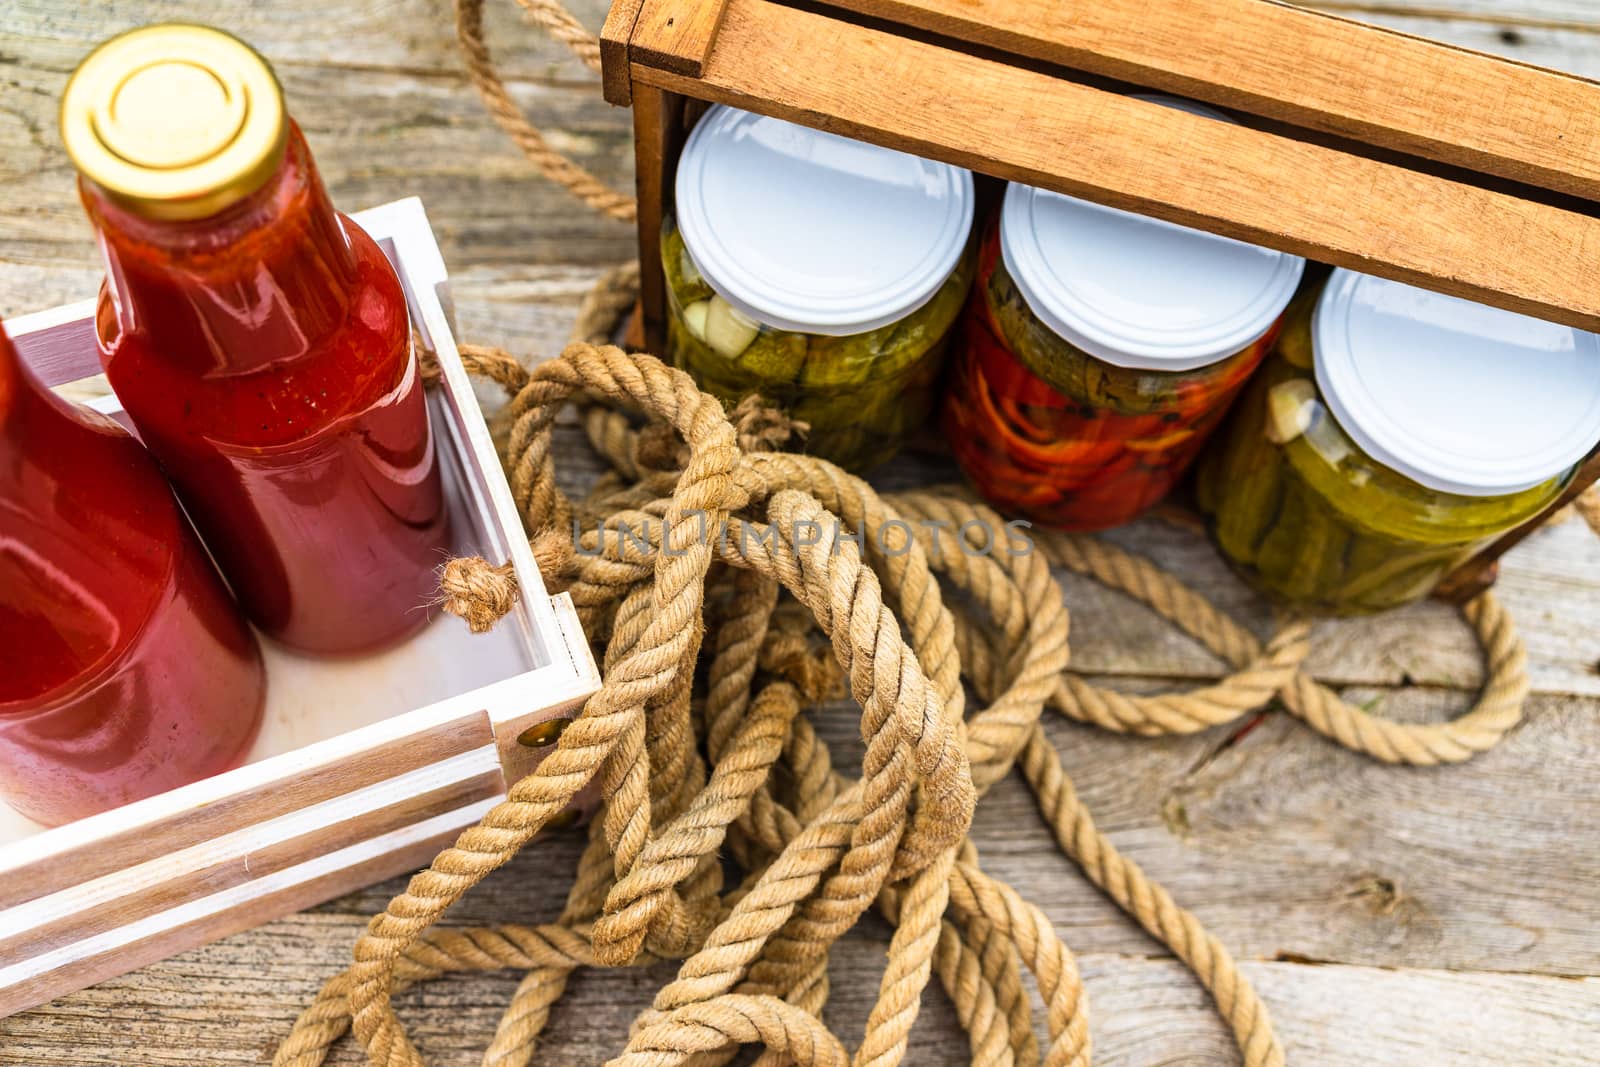 Top view of bottles of tomato sauce, preserved canned pickled food concept isolated in a rustic composition.